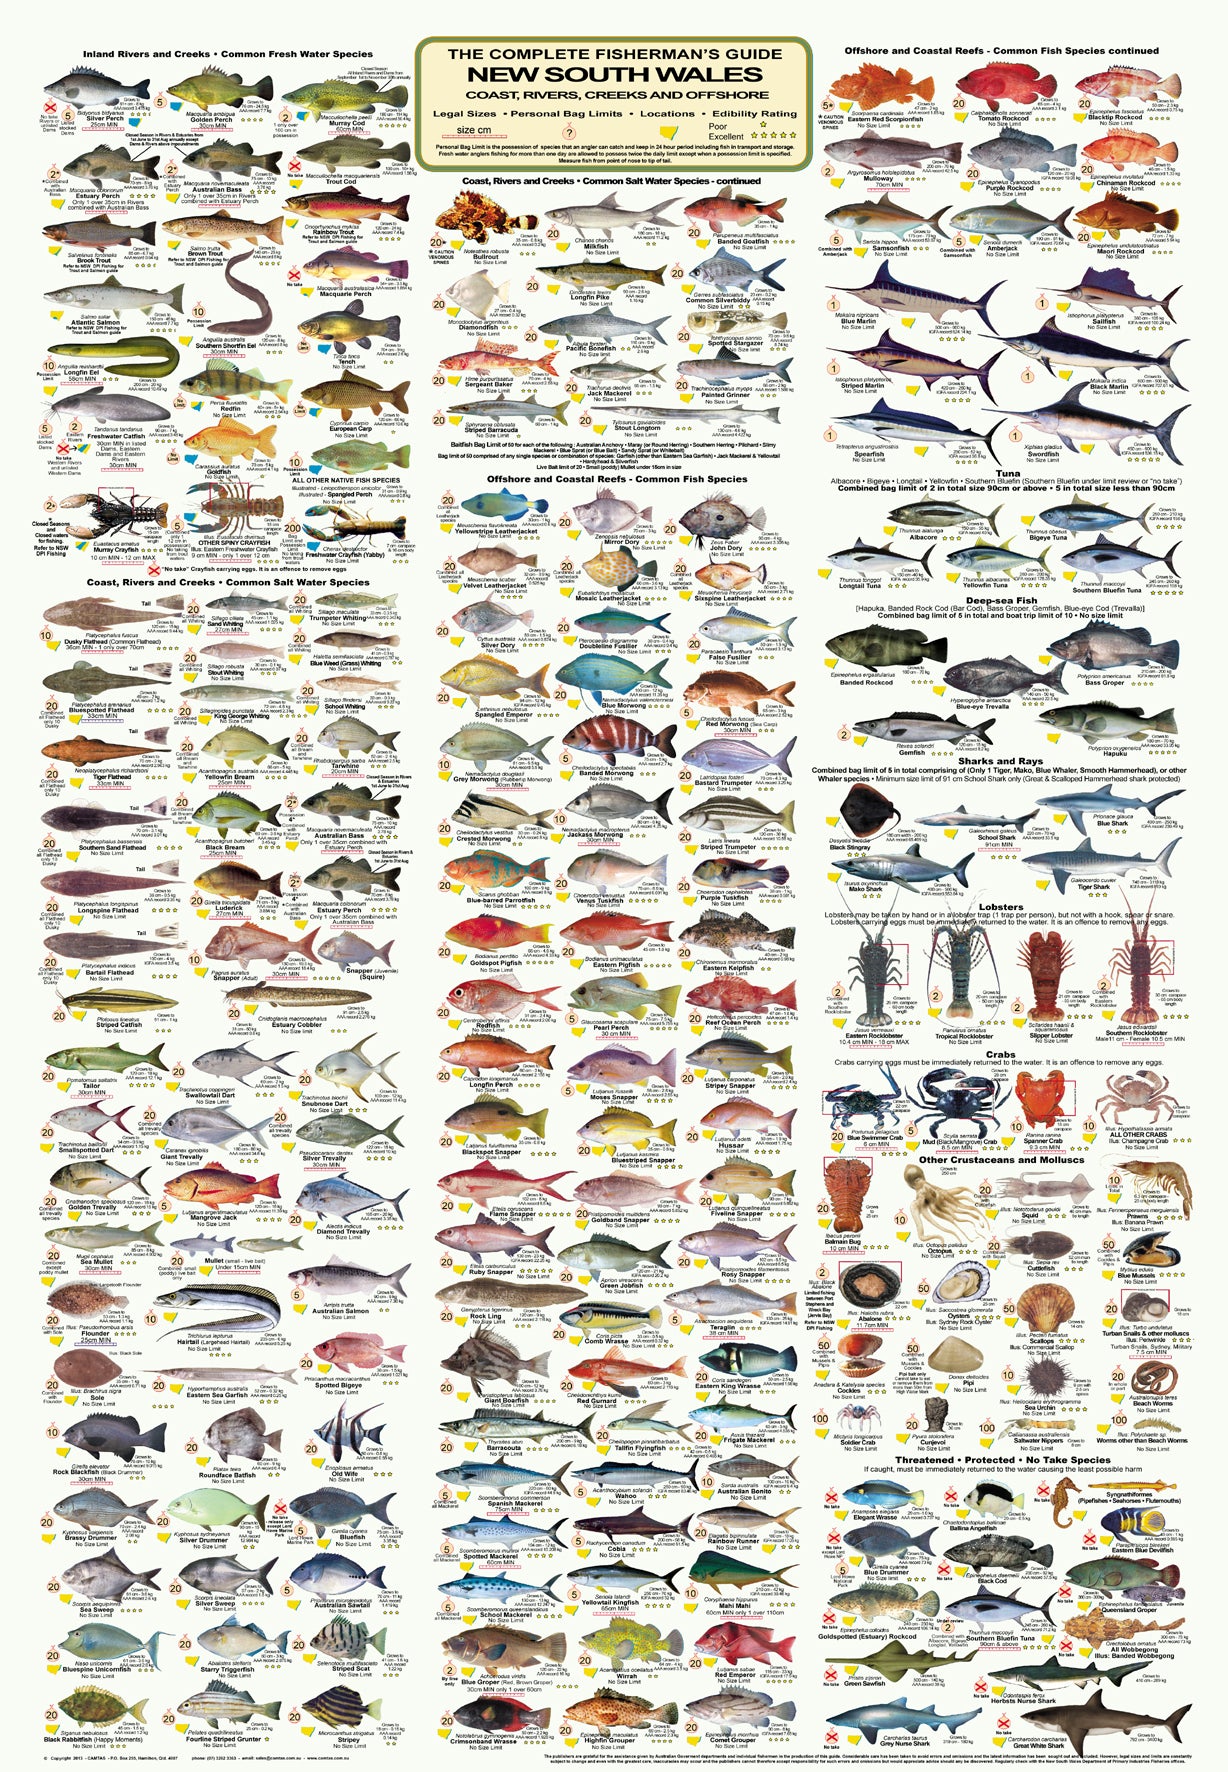 Buy The Complete Fisherman's Guide New South Wales – The Chart